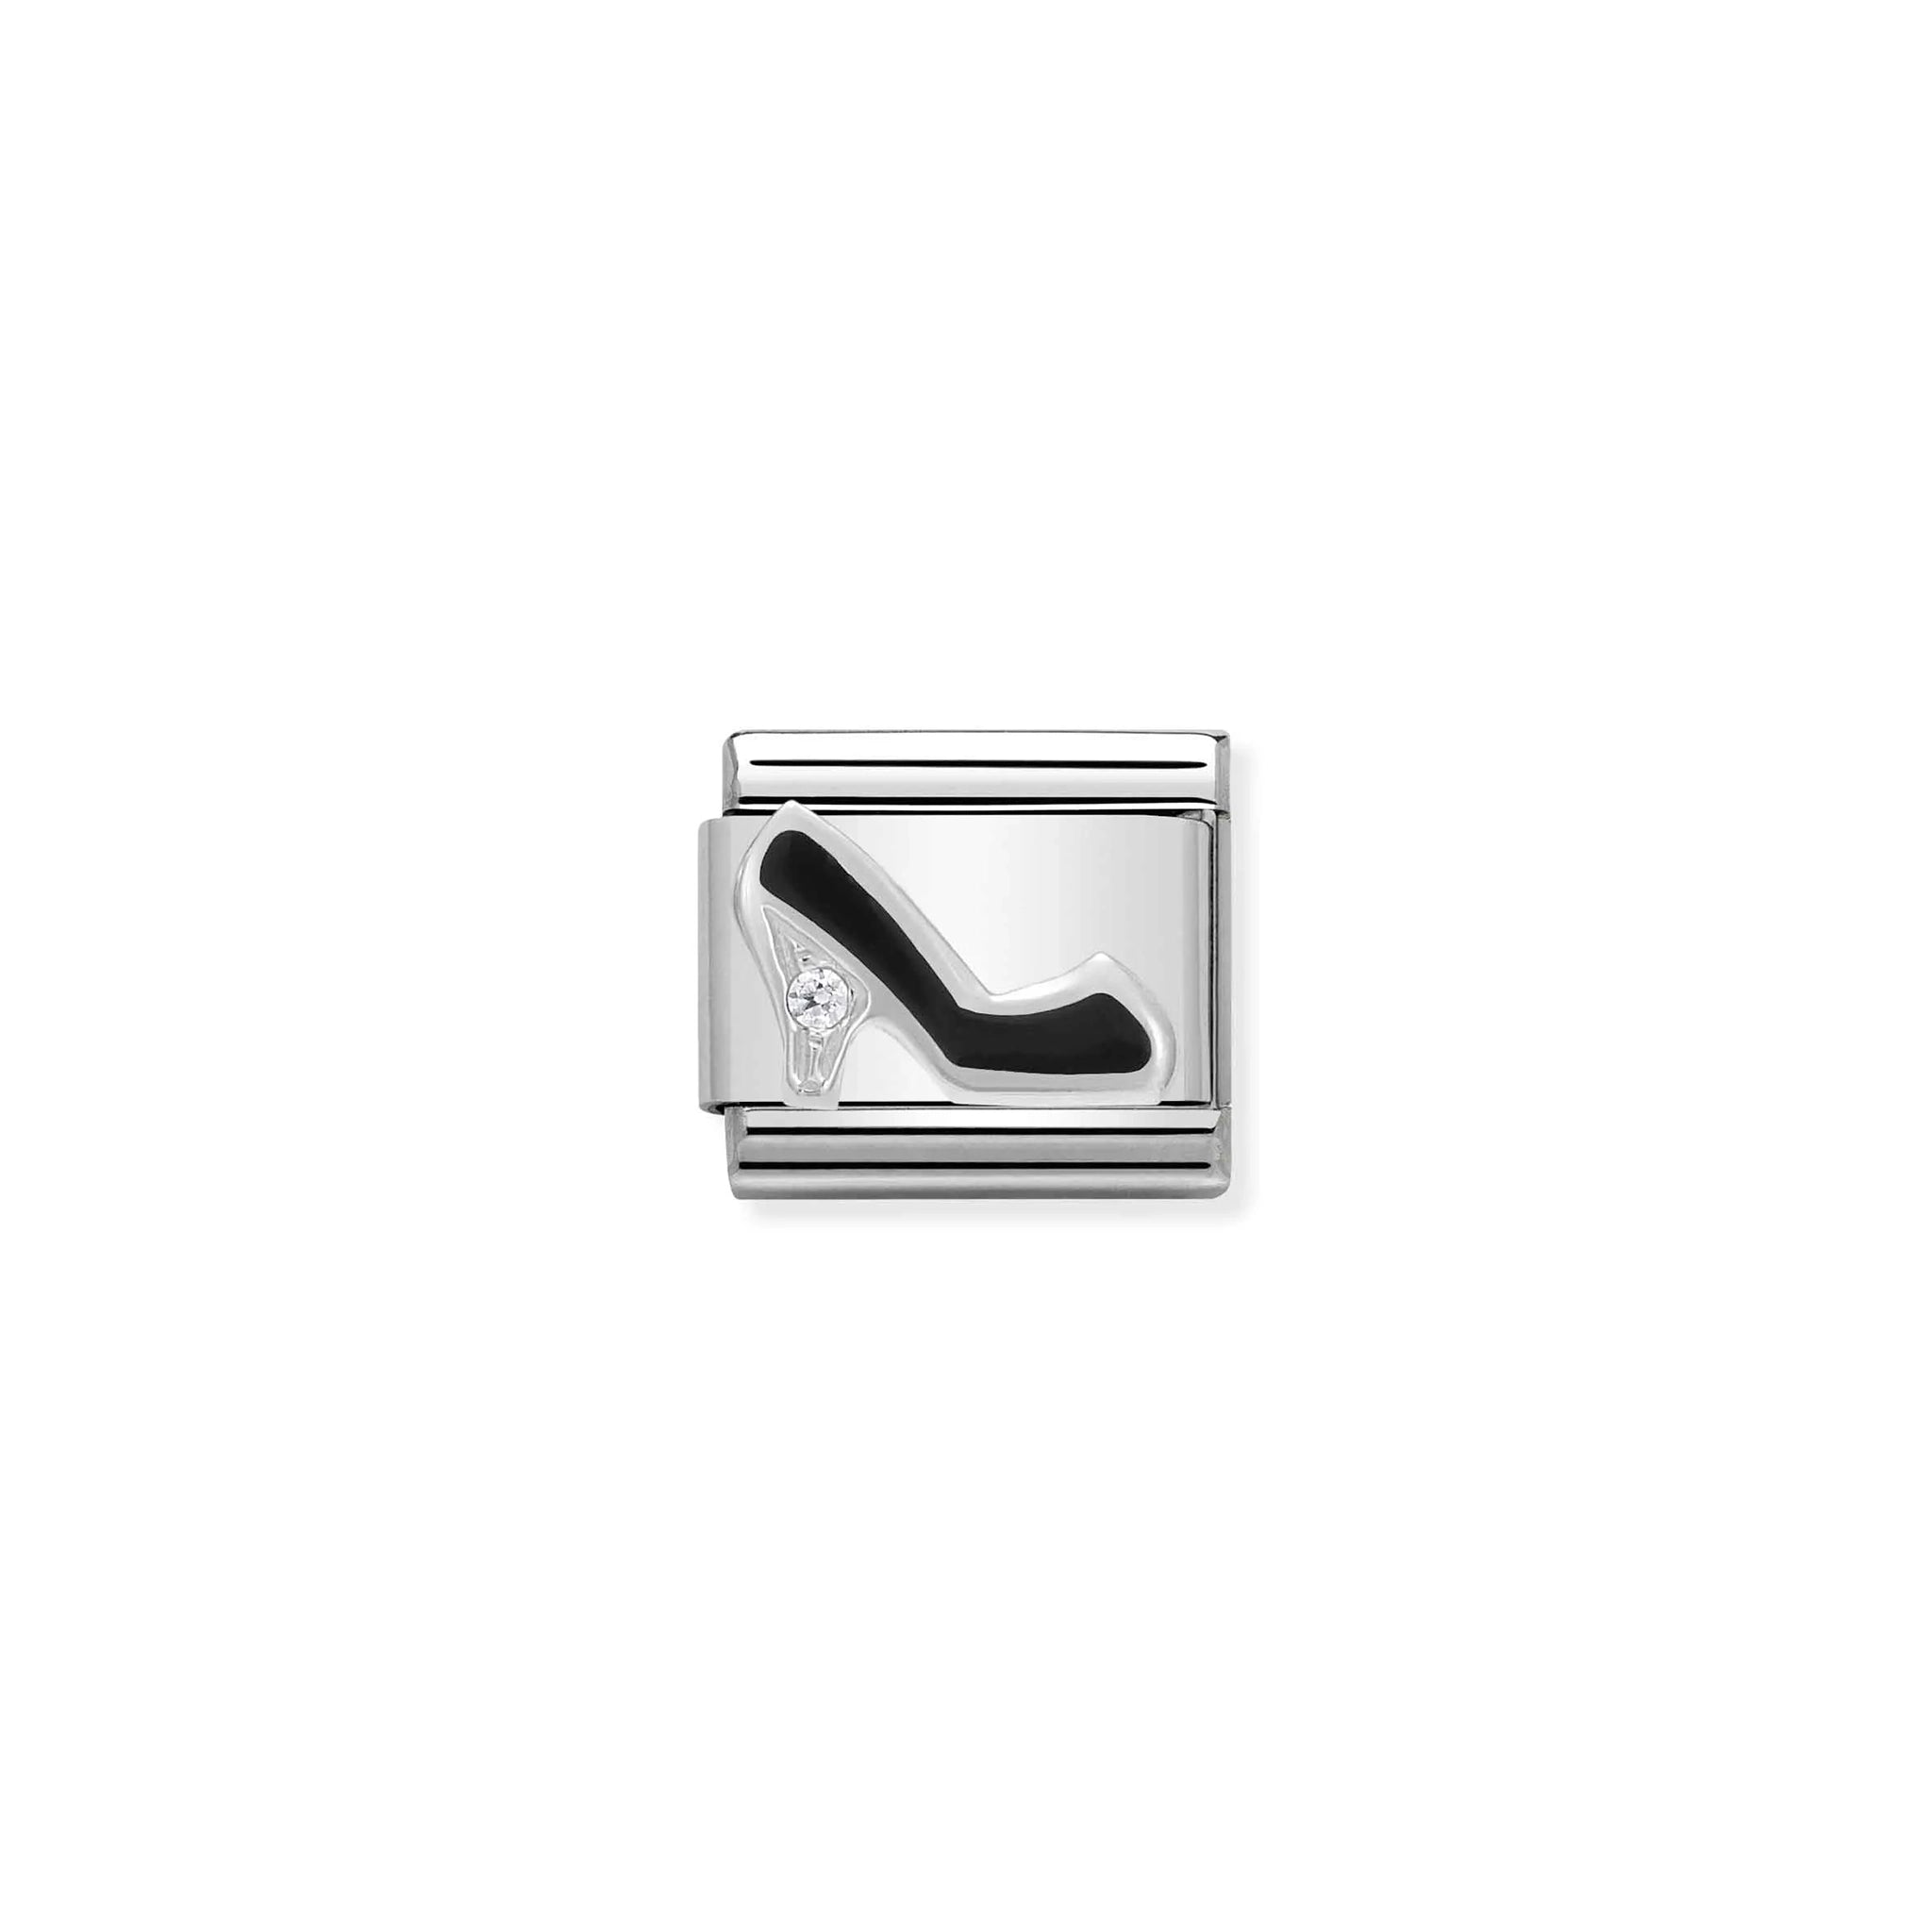 Nomination charm link featuring a silver high heel shoe in black enamel with a cubic zirconia stone on the heel